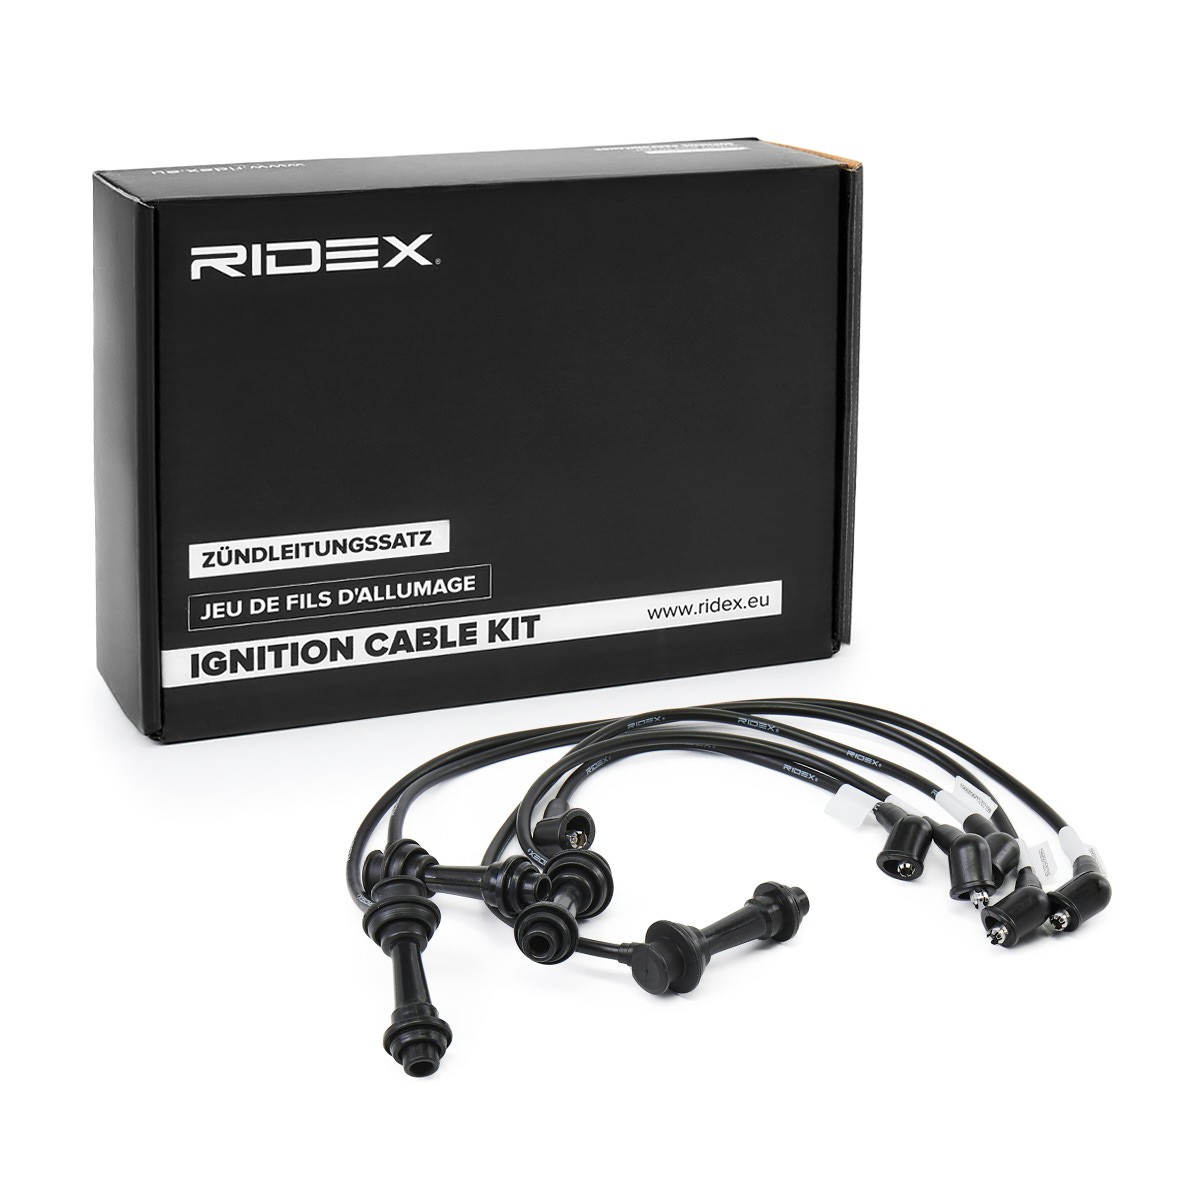 RIDEX 685I0228 Ignition Cable Kit